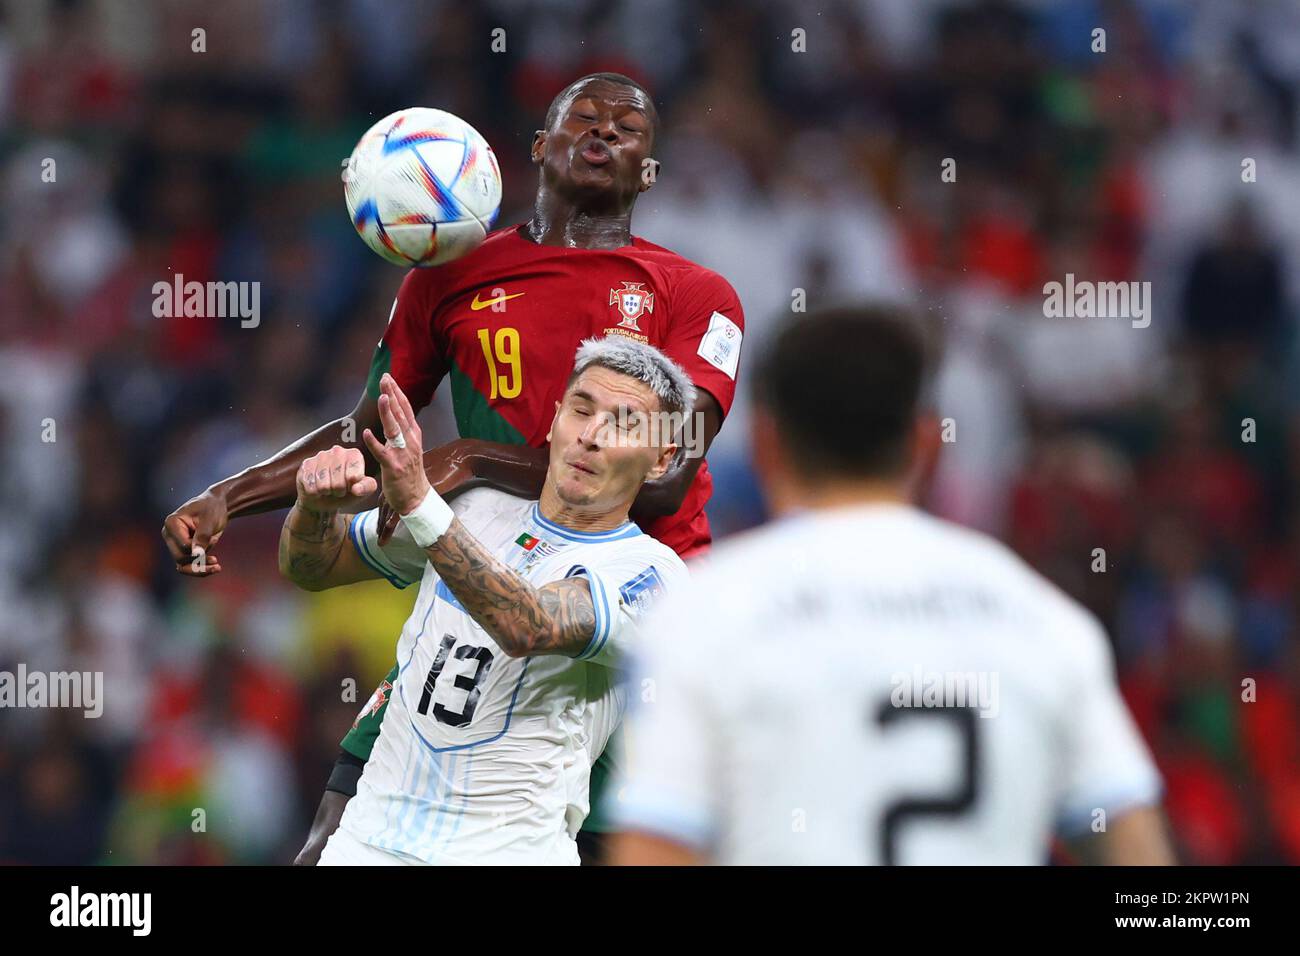 Lusail, Qatar. 28th Nov, 2022. Soccer, World Cup 2022 in Qatar, Portugal - Uruguay, Preliminary Round, Group H, Matchday 2, Lusail Stadium, Portugal's Nuno Mendes (back) fights for the ball with Uruguay's Guillermo Varela. Credit: Tom Weller/dpa/Alamy Live News Stock Photo